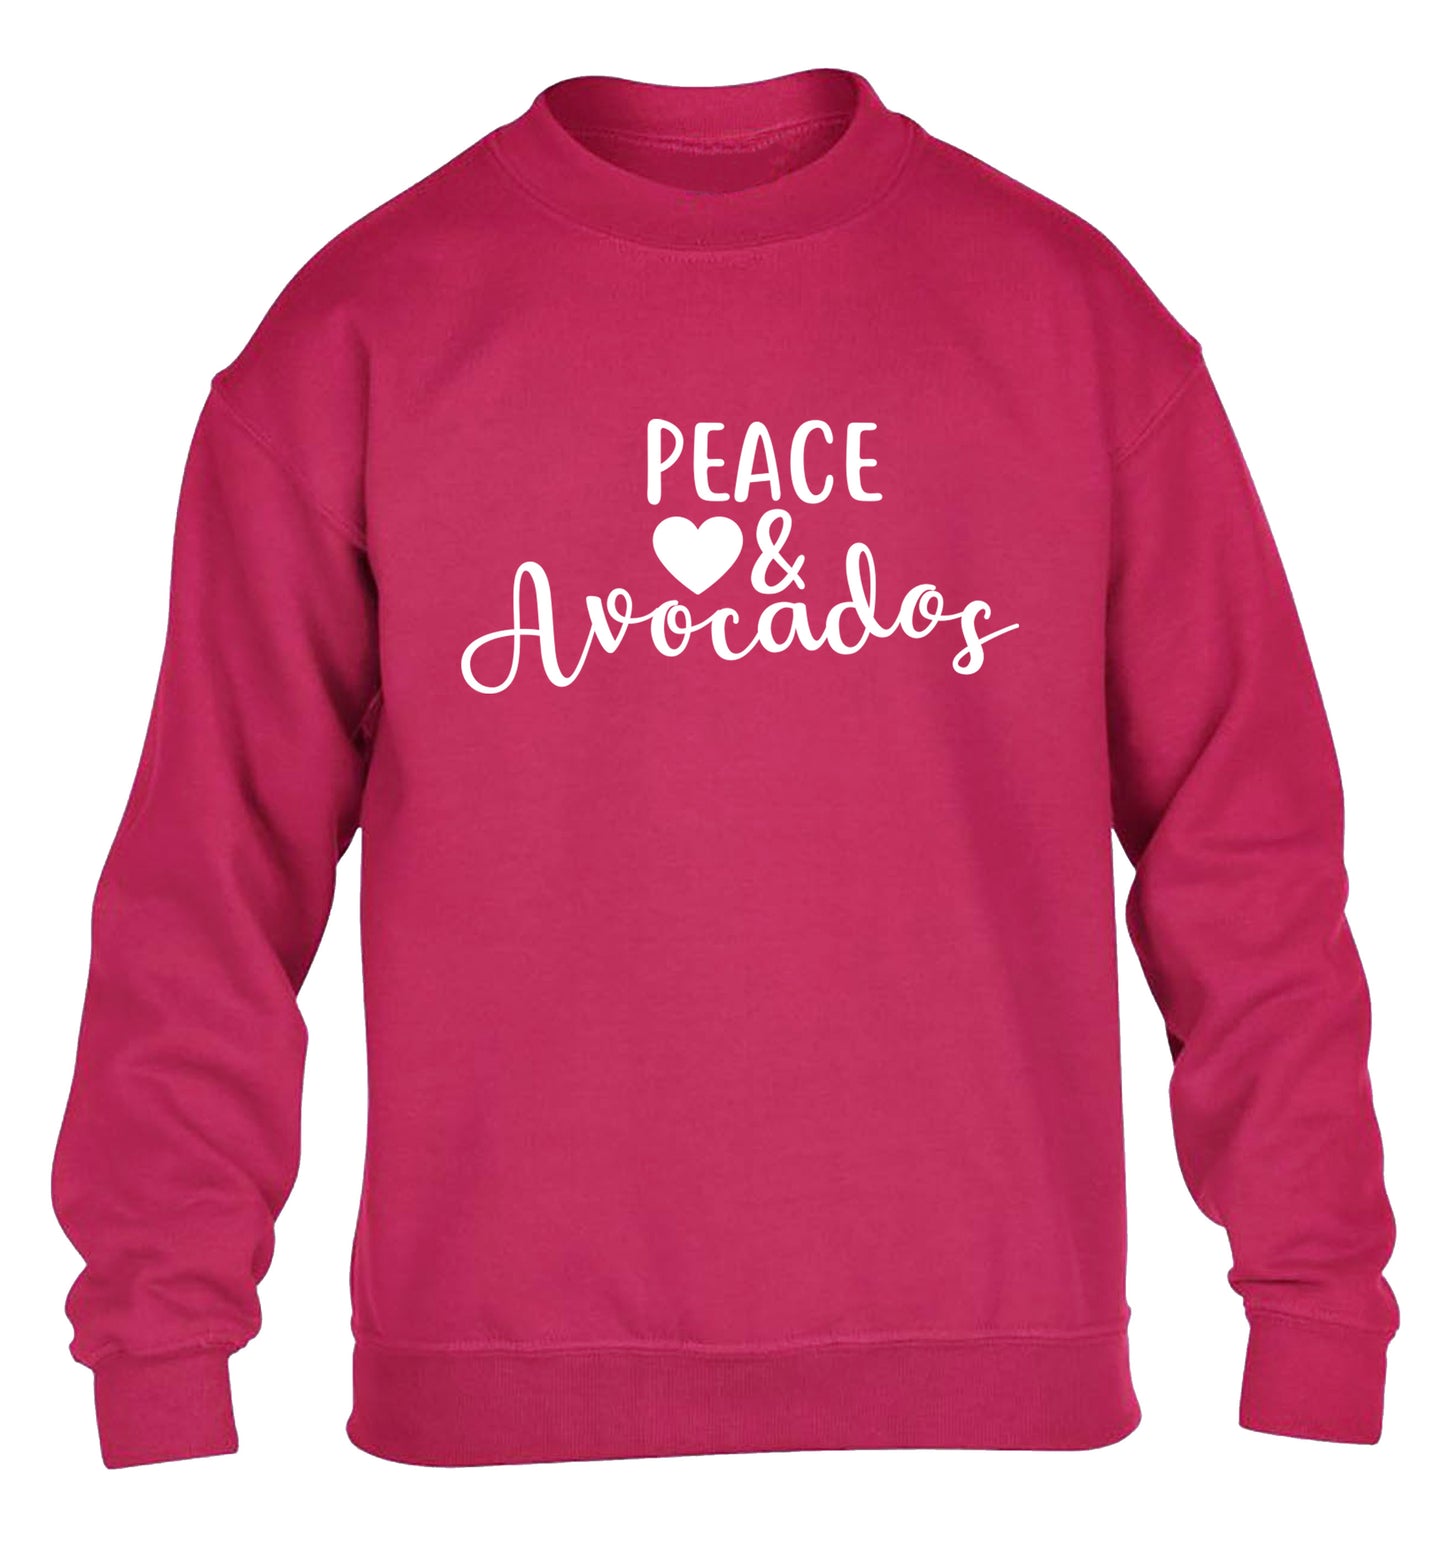 Peace love and avocados children's pink sweater 12-14 Years